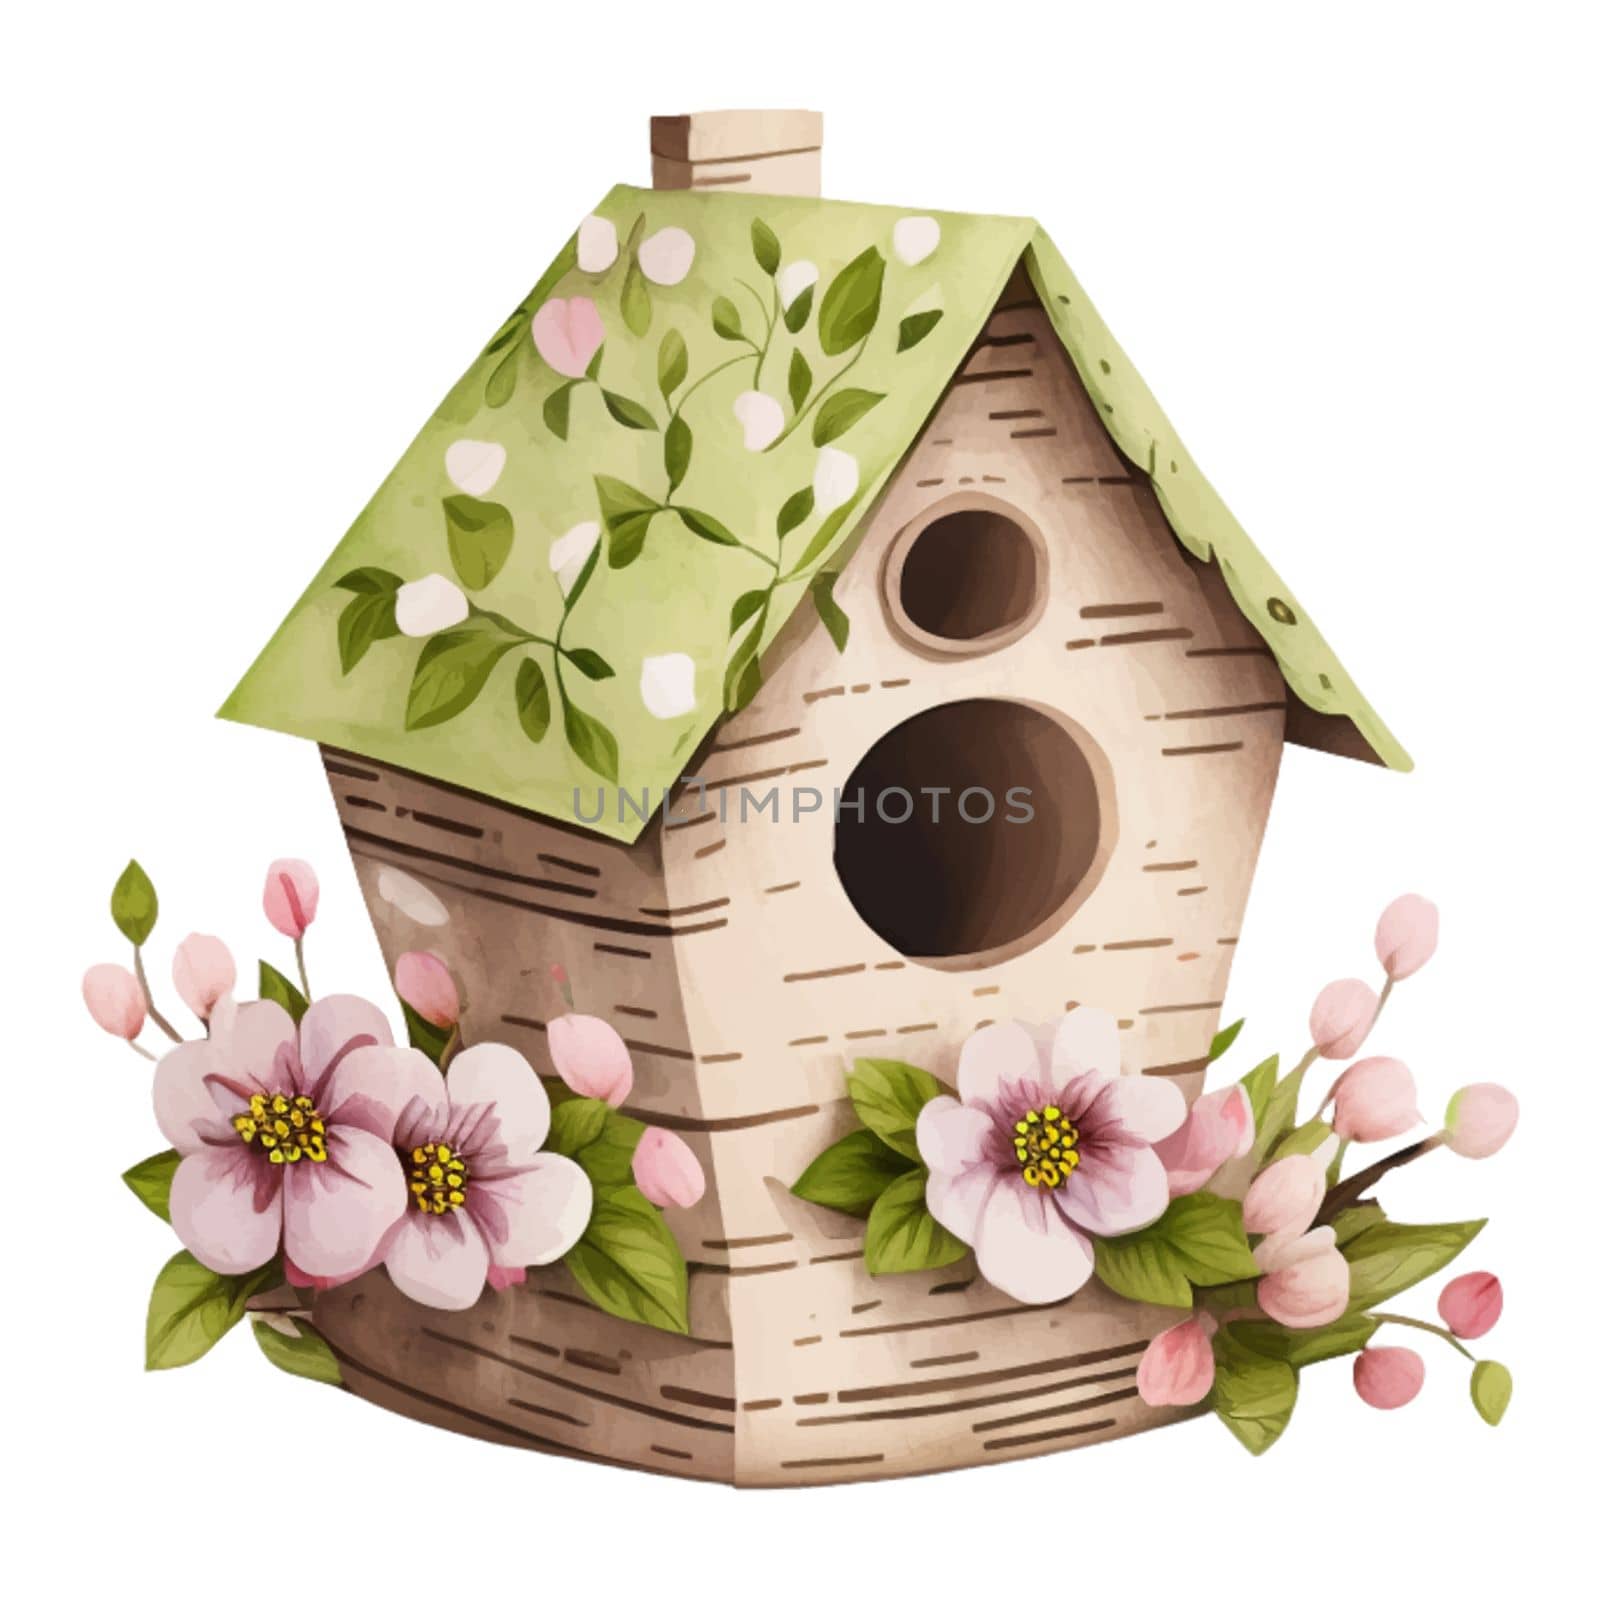 Watercolor Illustration of spring love bird house with cute flowers and leaves